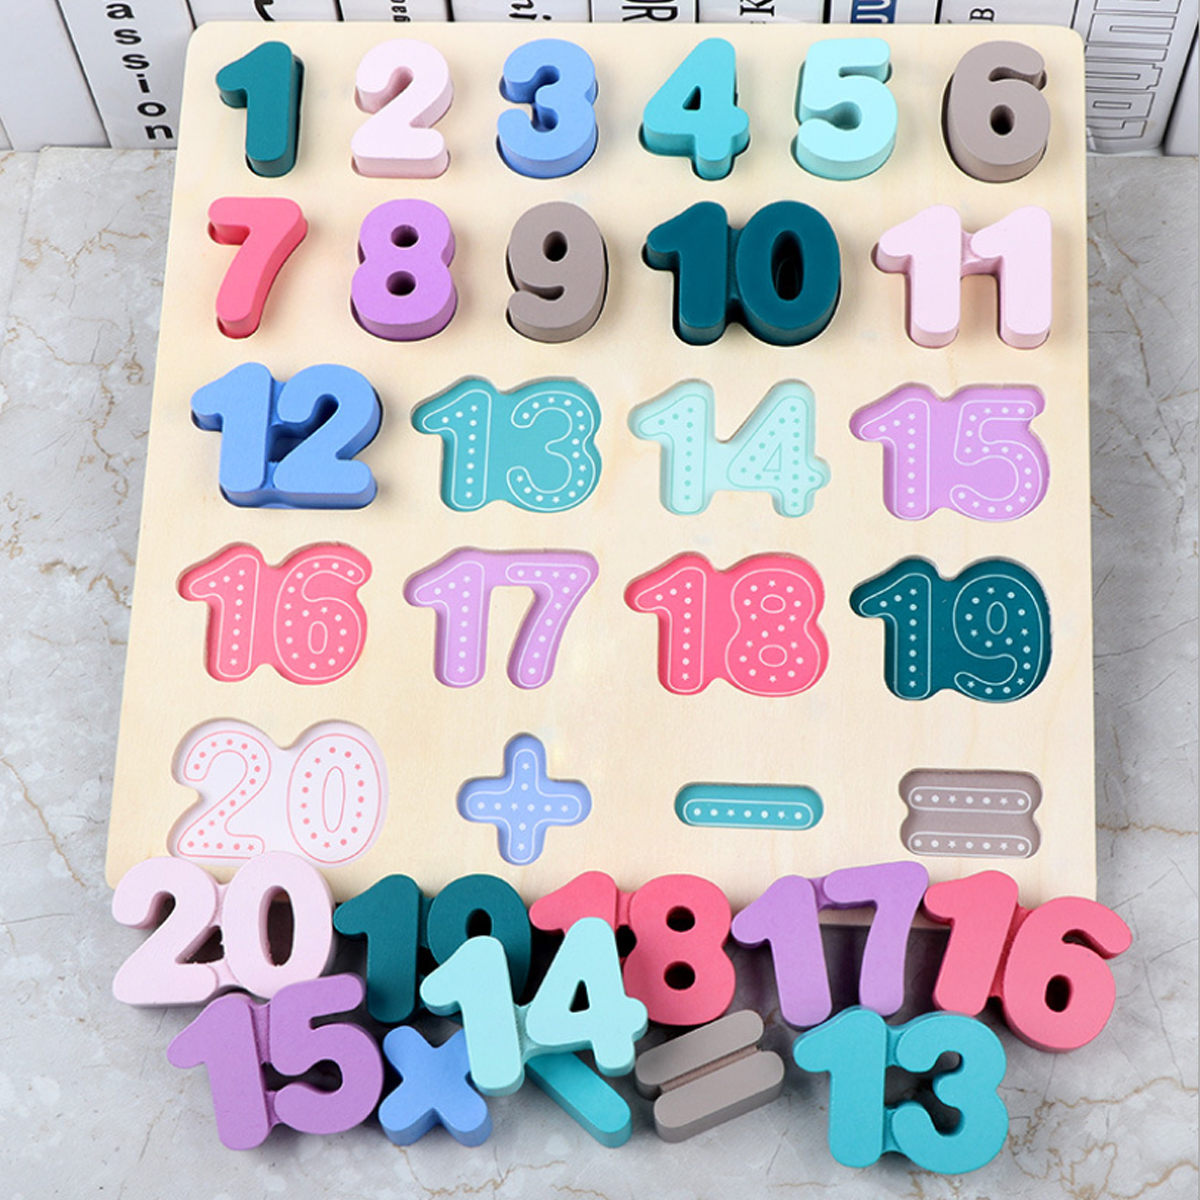 Alphanumeric-Board-Wooden-Jigsaw-Volume-Wooden-Baby-Young-Children-Early-Education-Educational-Toys-1635558-3